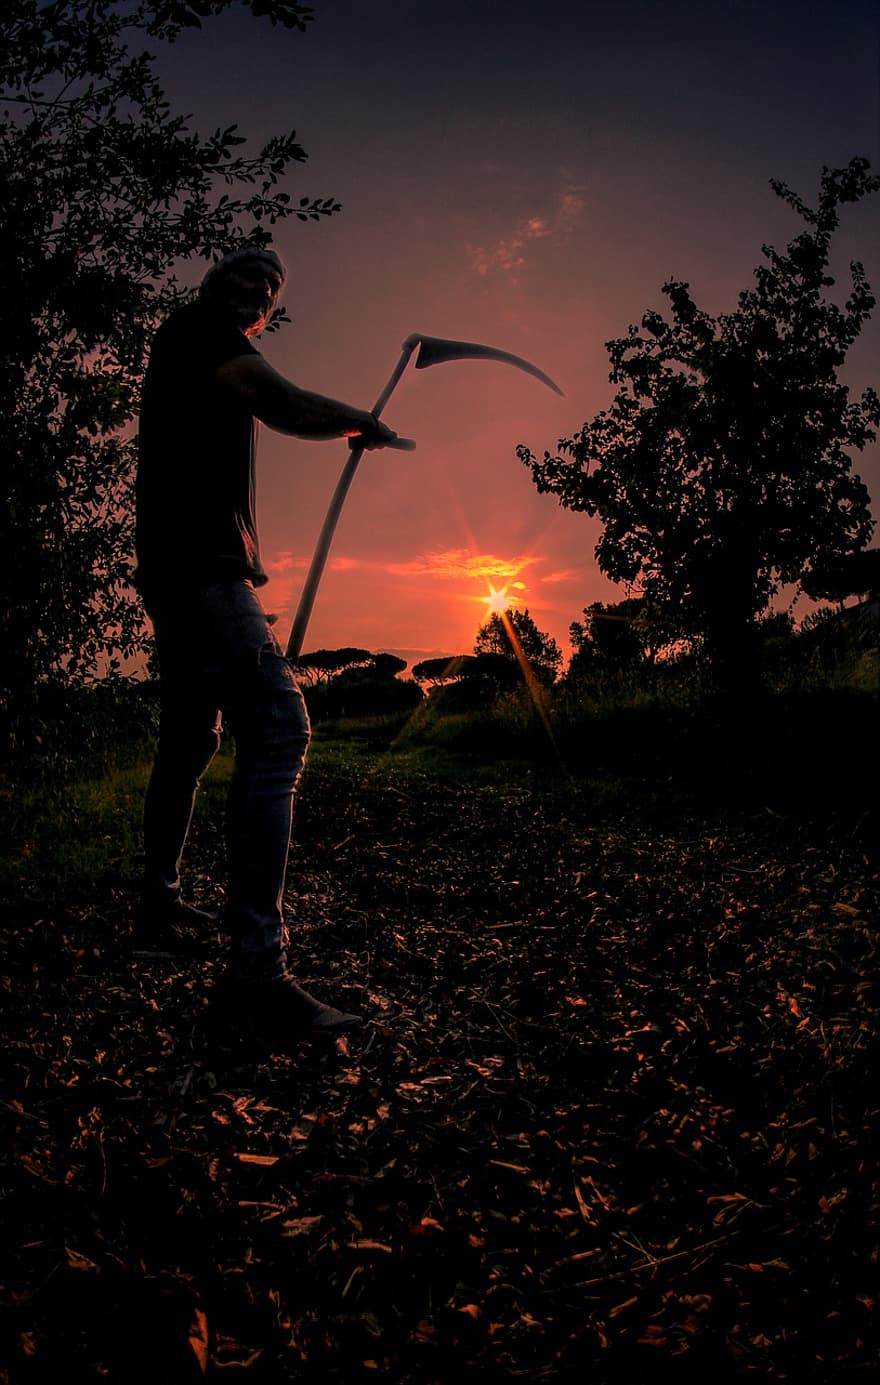 Scythe, Campaign, Farmer, Wheat, Field, Agriculture, Mow, Collected, Nature, Tractor, Grass